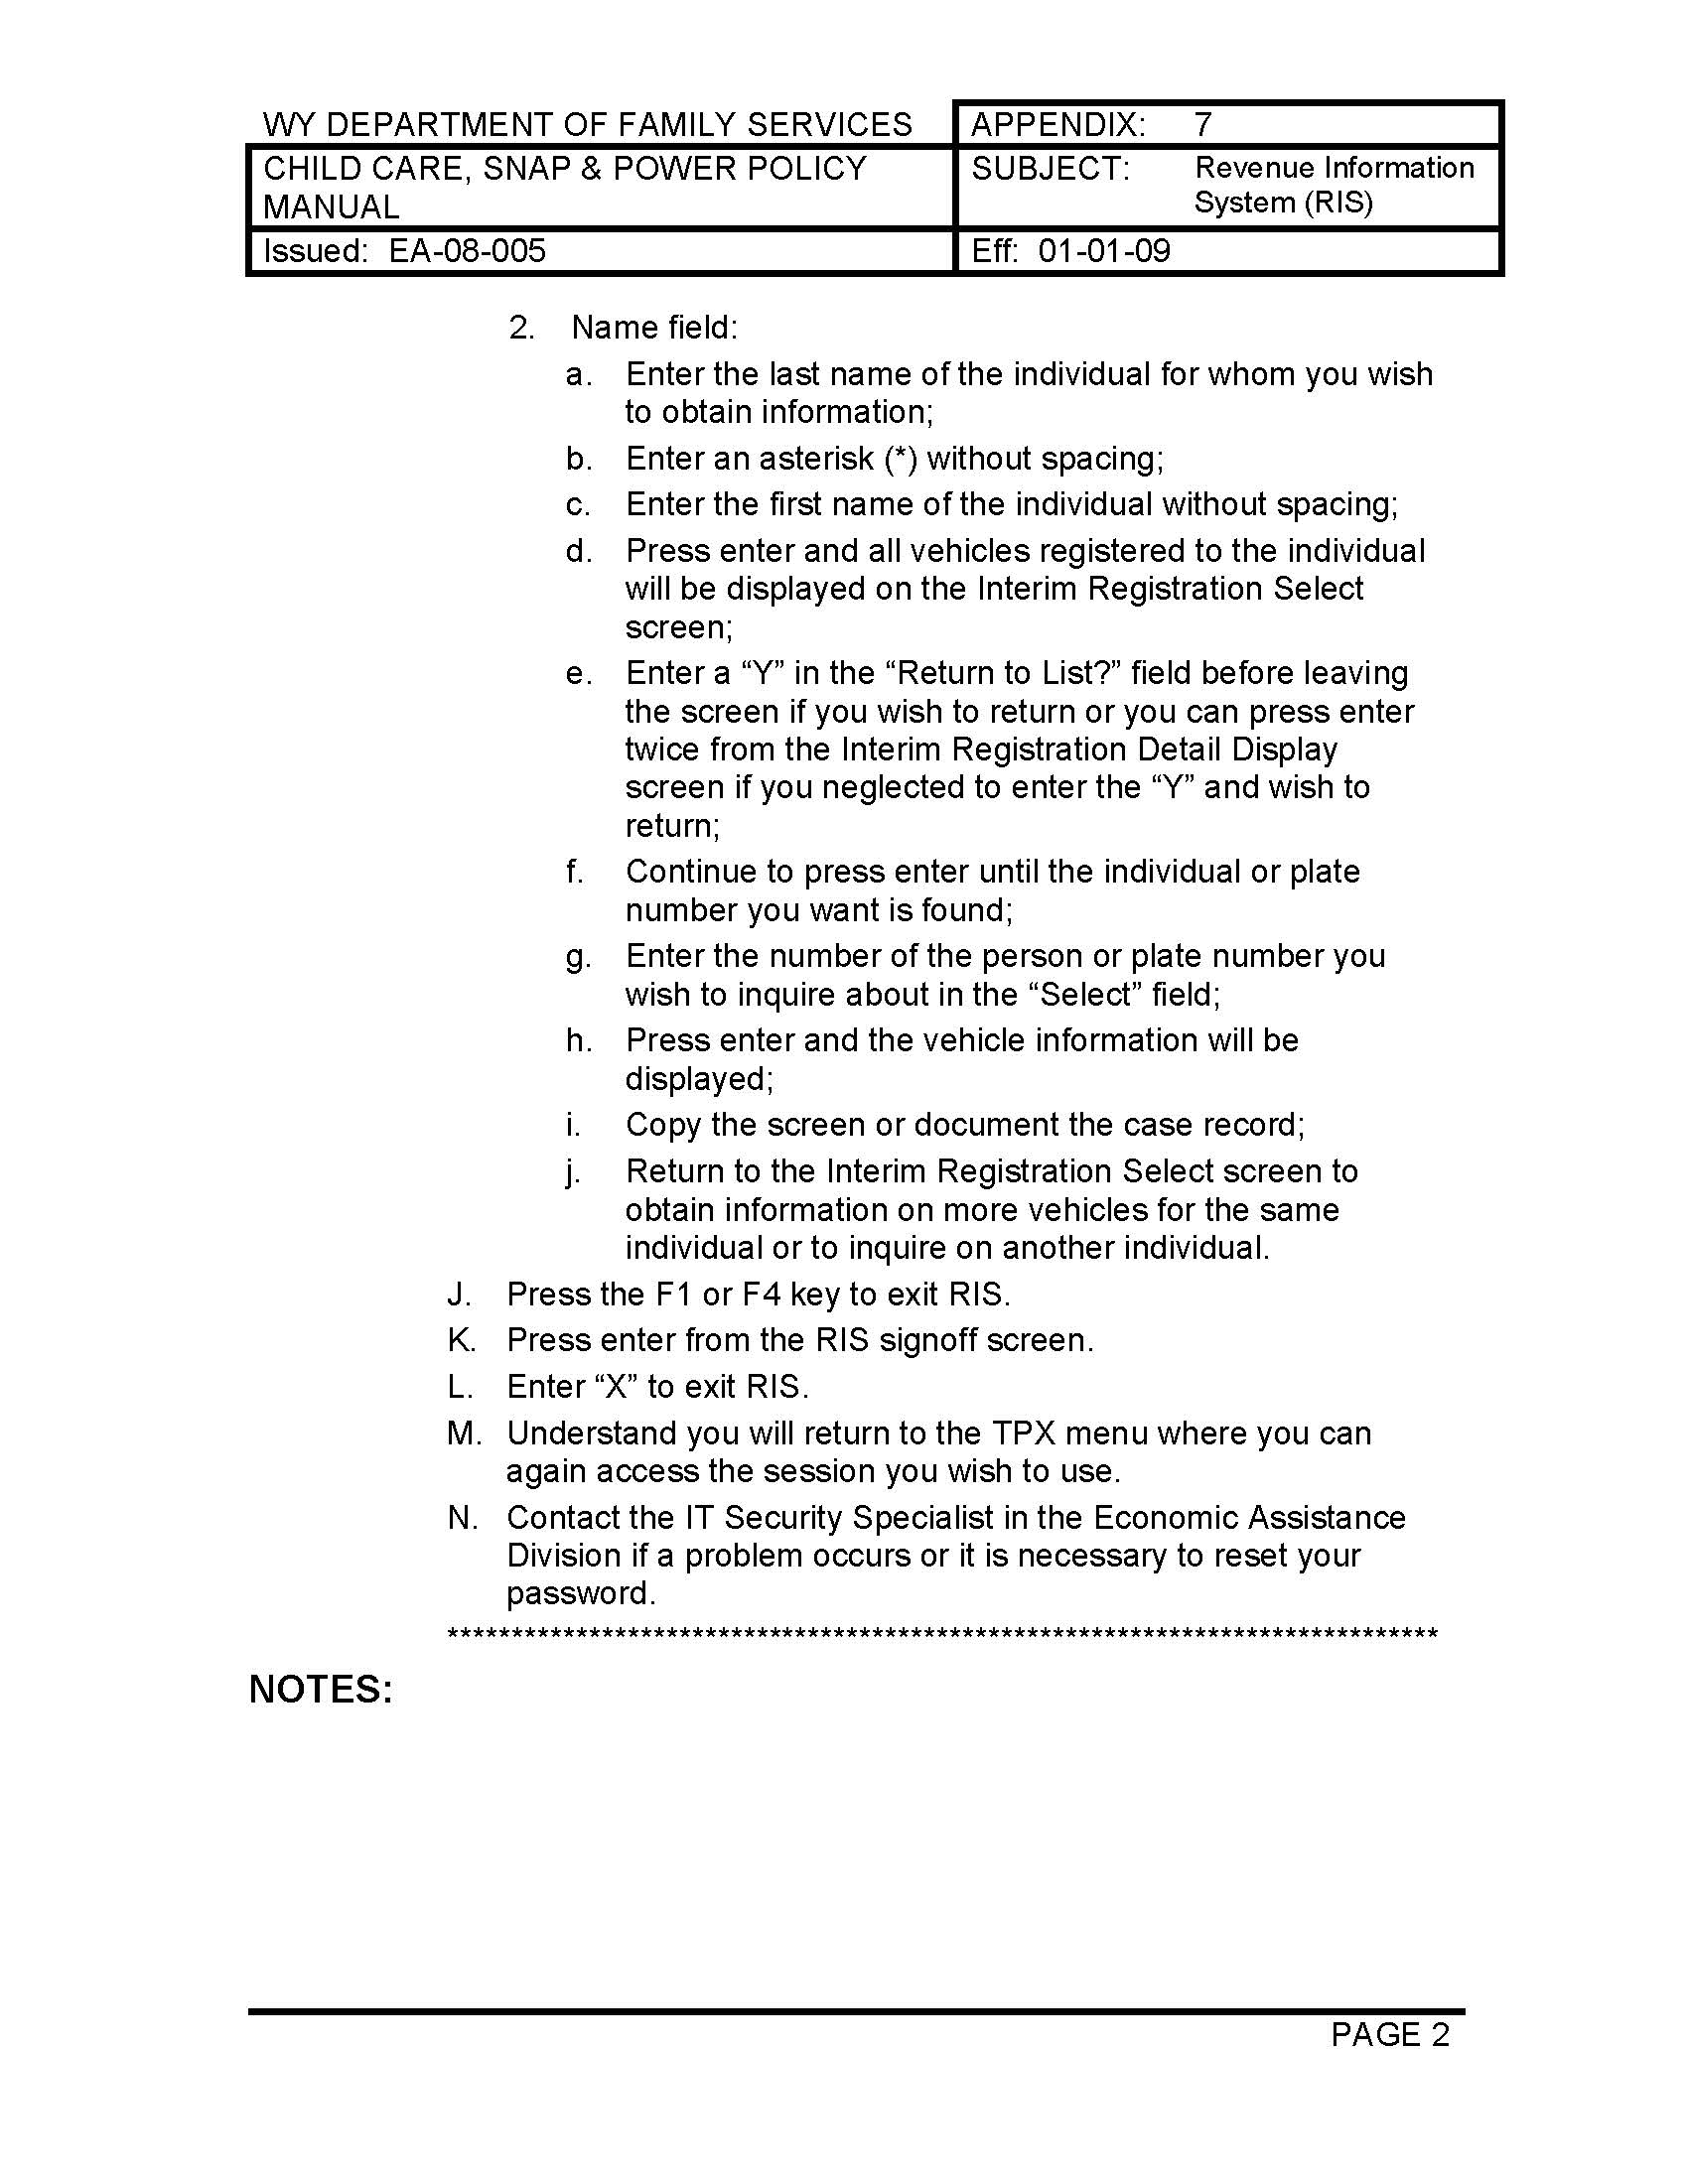 Child-Care-Policy-Manual-Appendix-7-Revenue-Information-System-Page-2